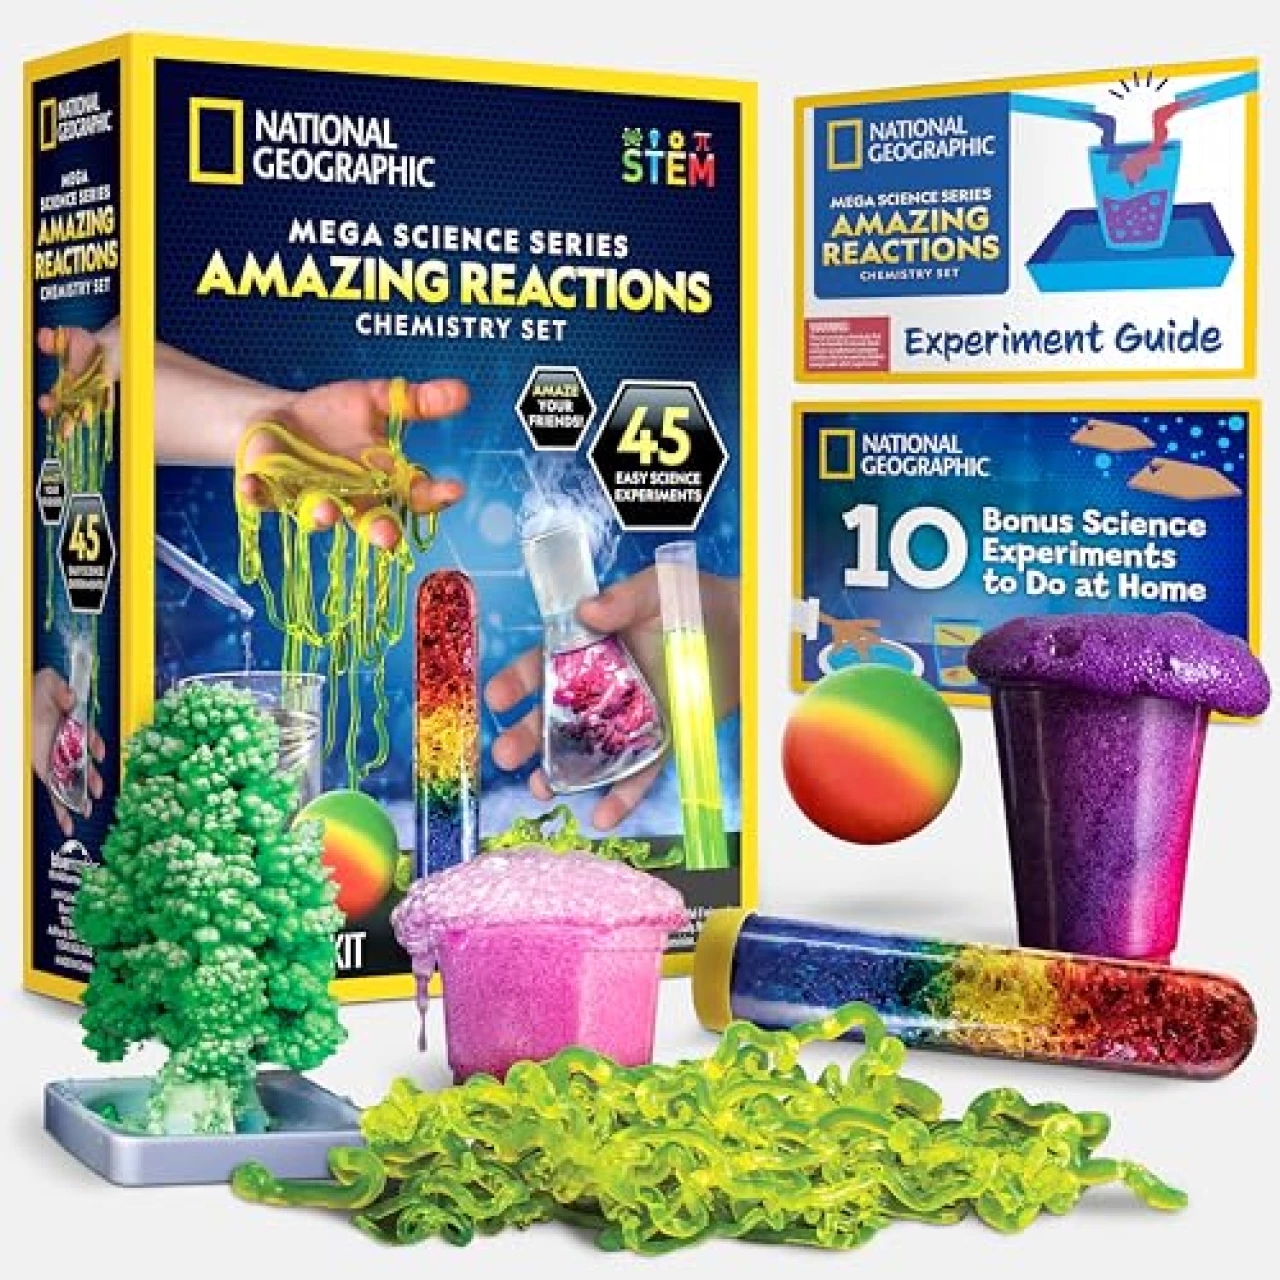 NATIONAL GEOGRAPHIC Amazing Chemistry Set - Chemistry Kit with 45 Science Experiments